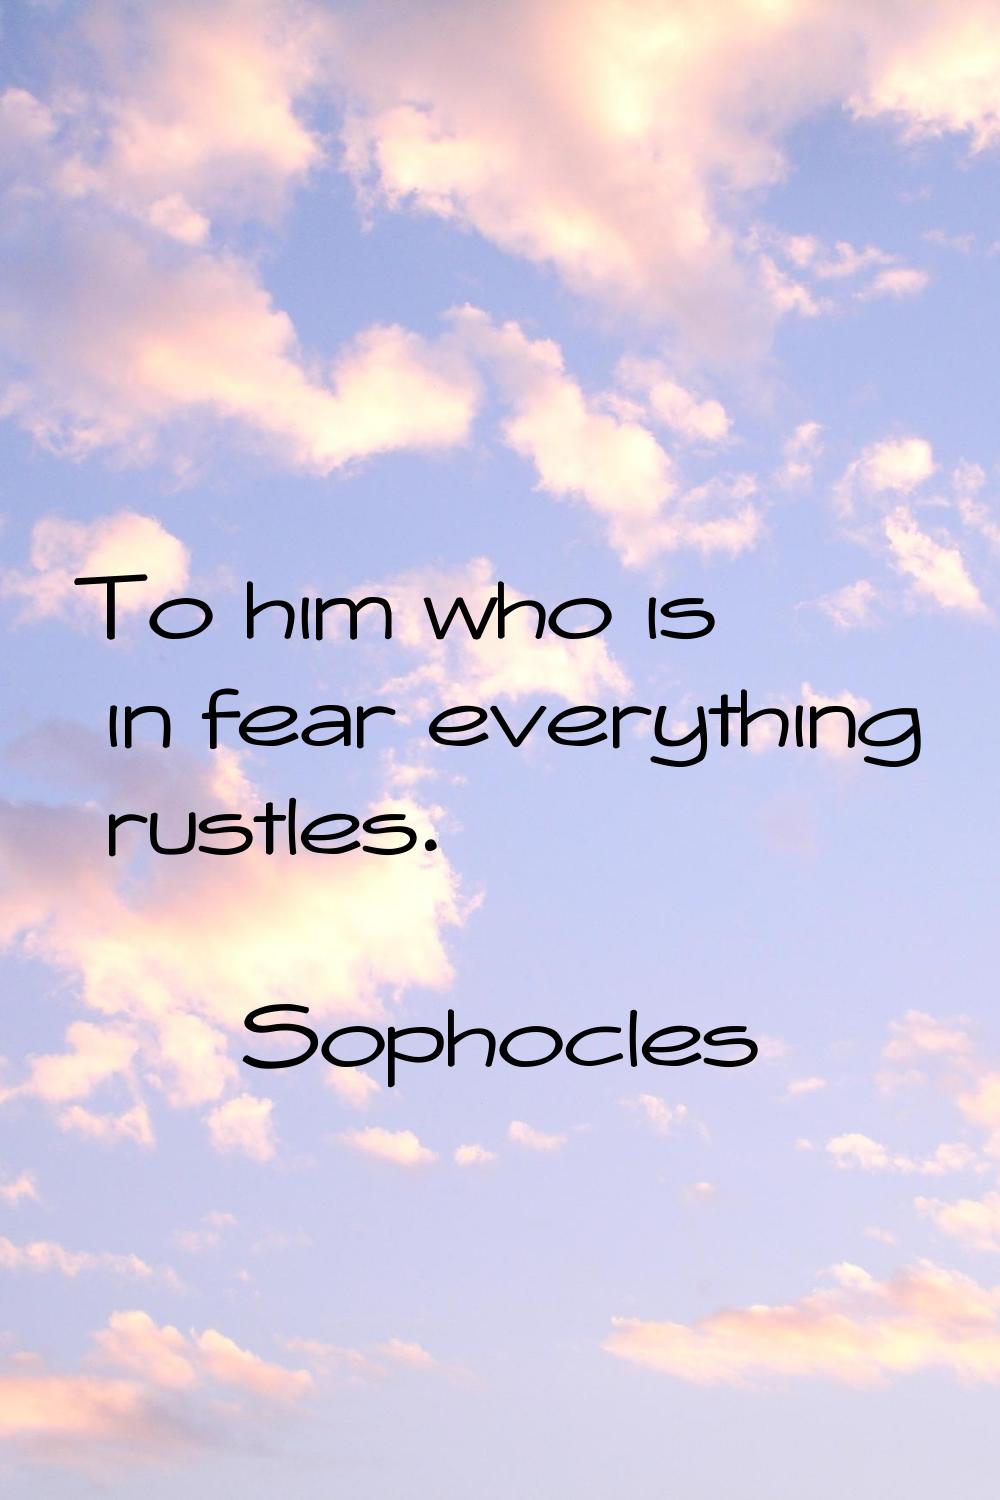 To him who is in fear everything rustles.